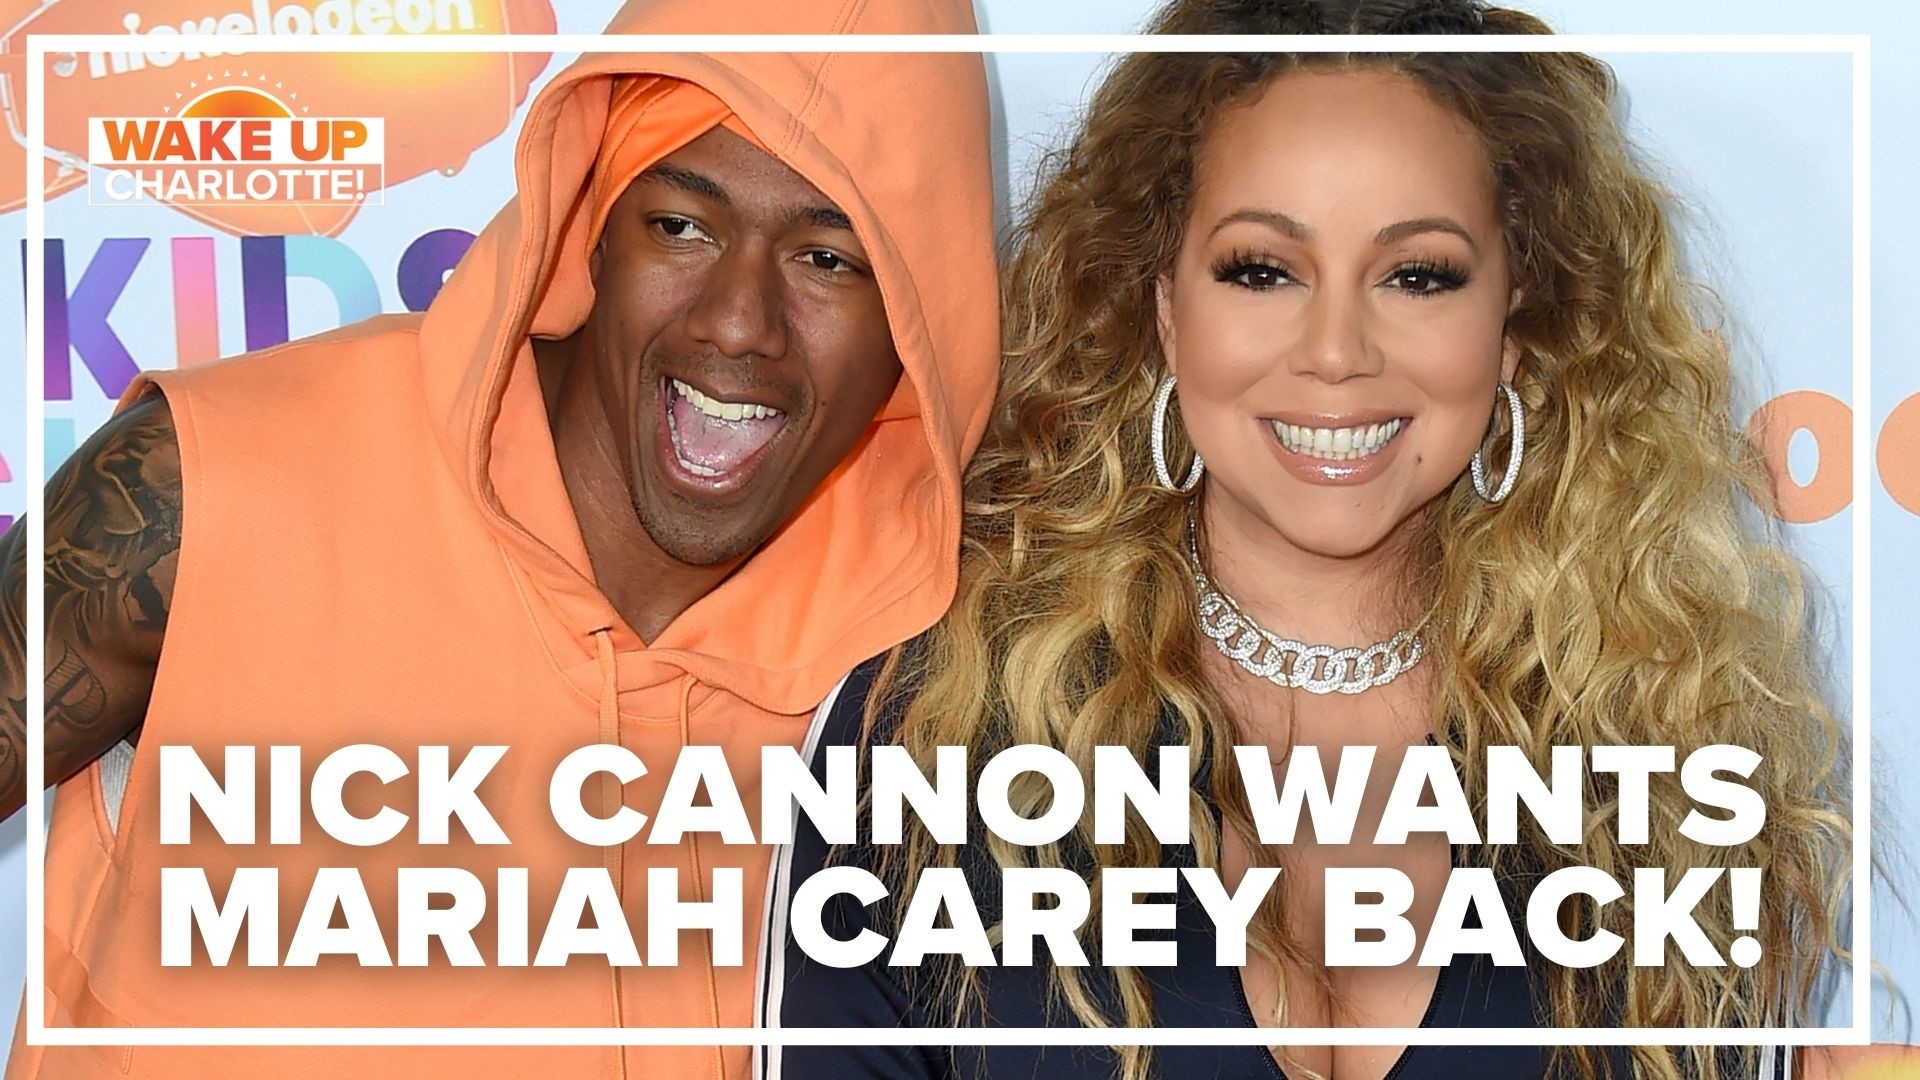 Nick Cannon recently said he's keeping the door open to rekindle his relationship with ex-wife Mariah Carey, describing the relationship as a "fairy tale."